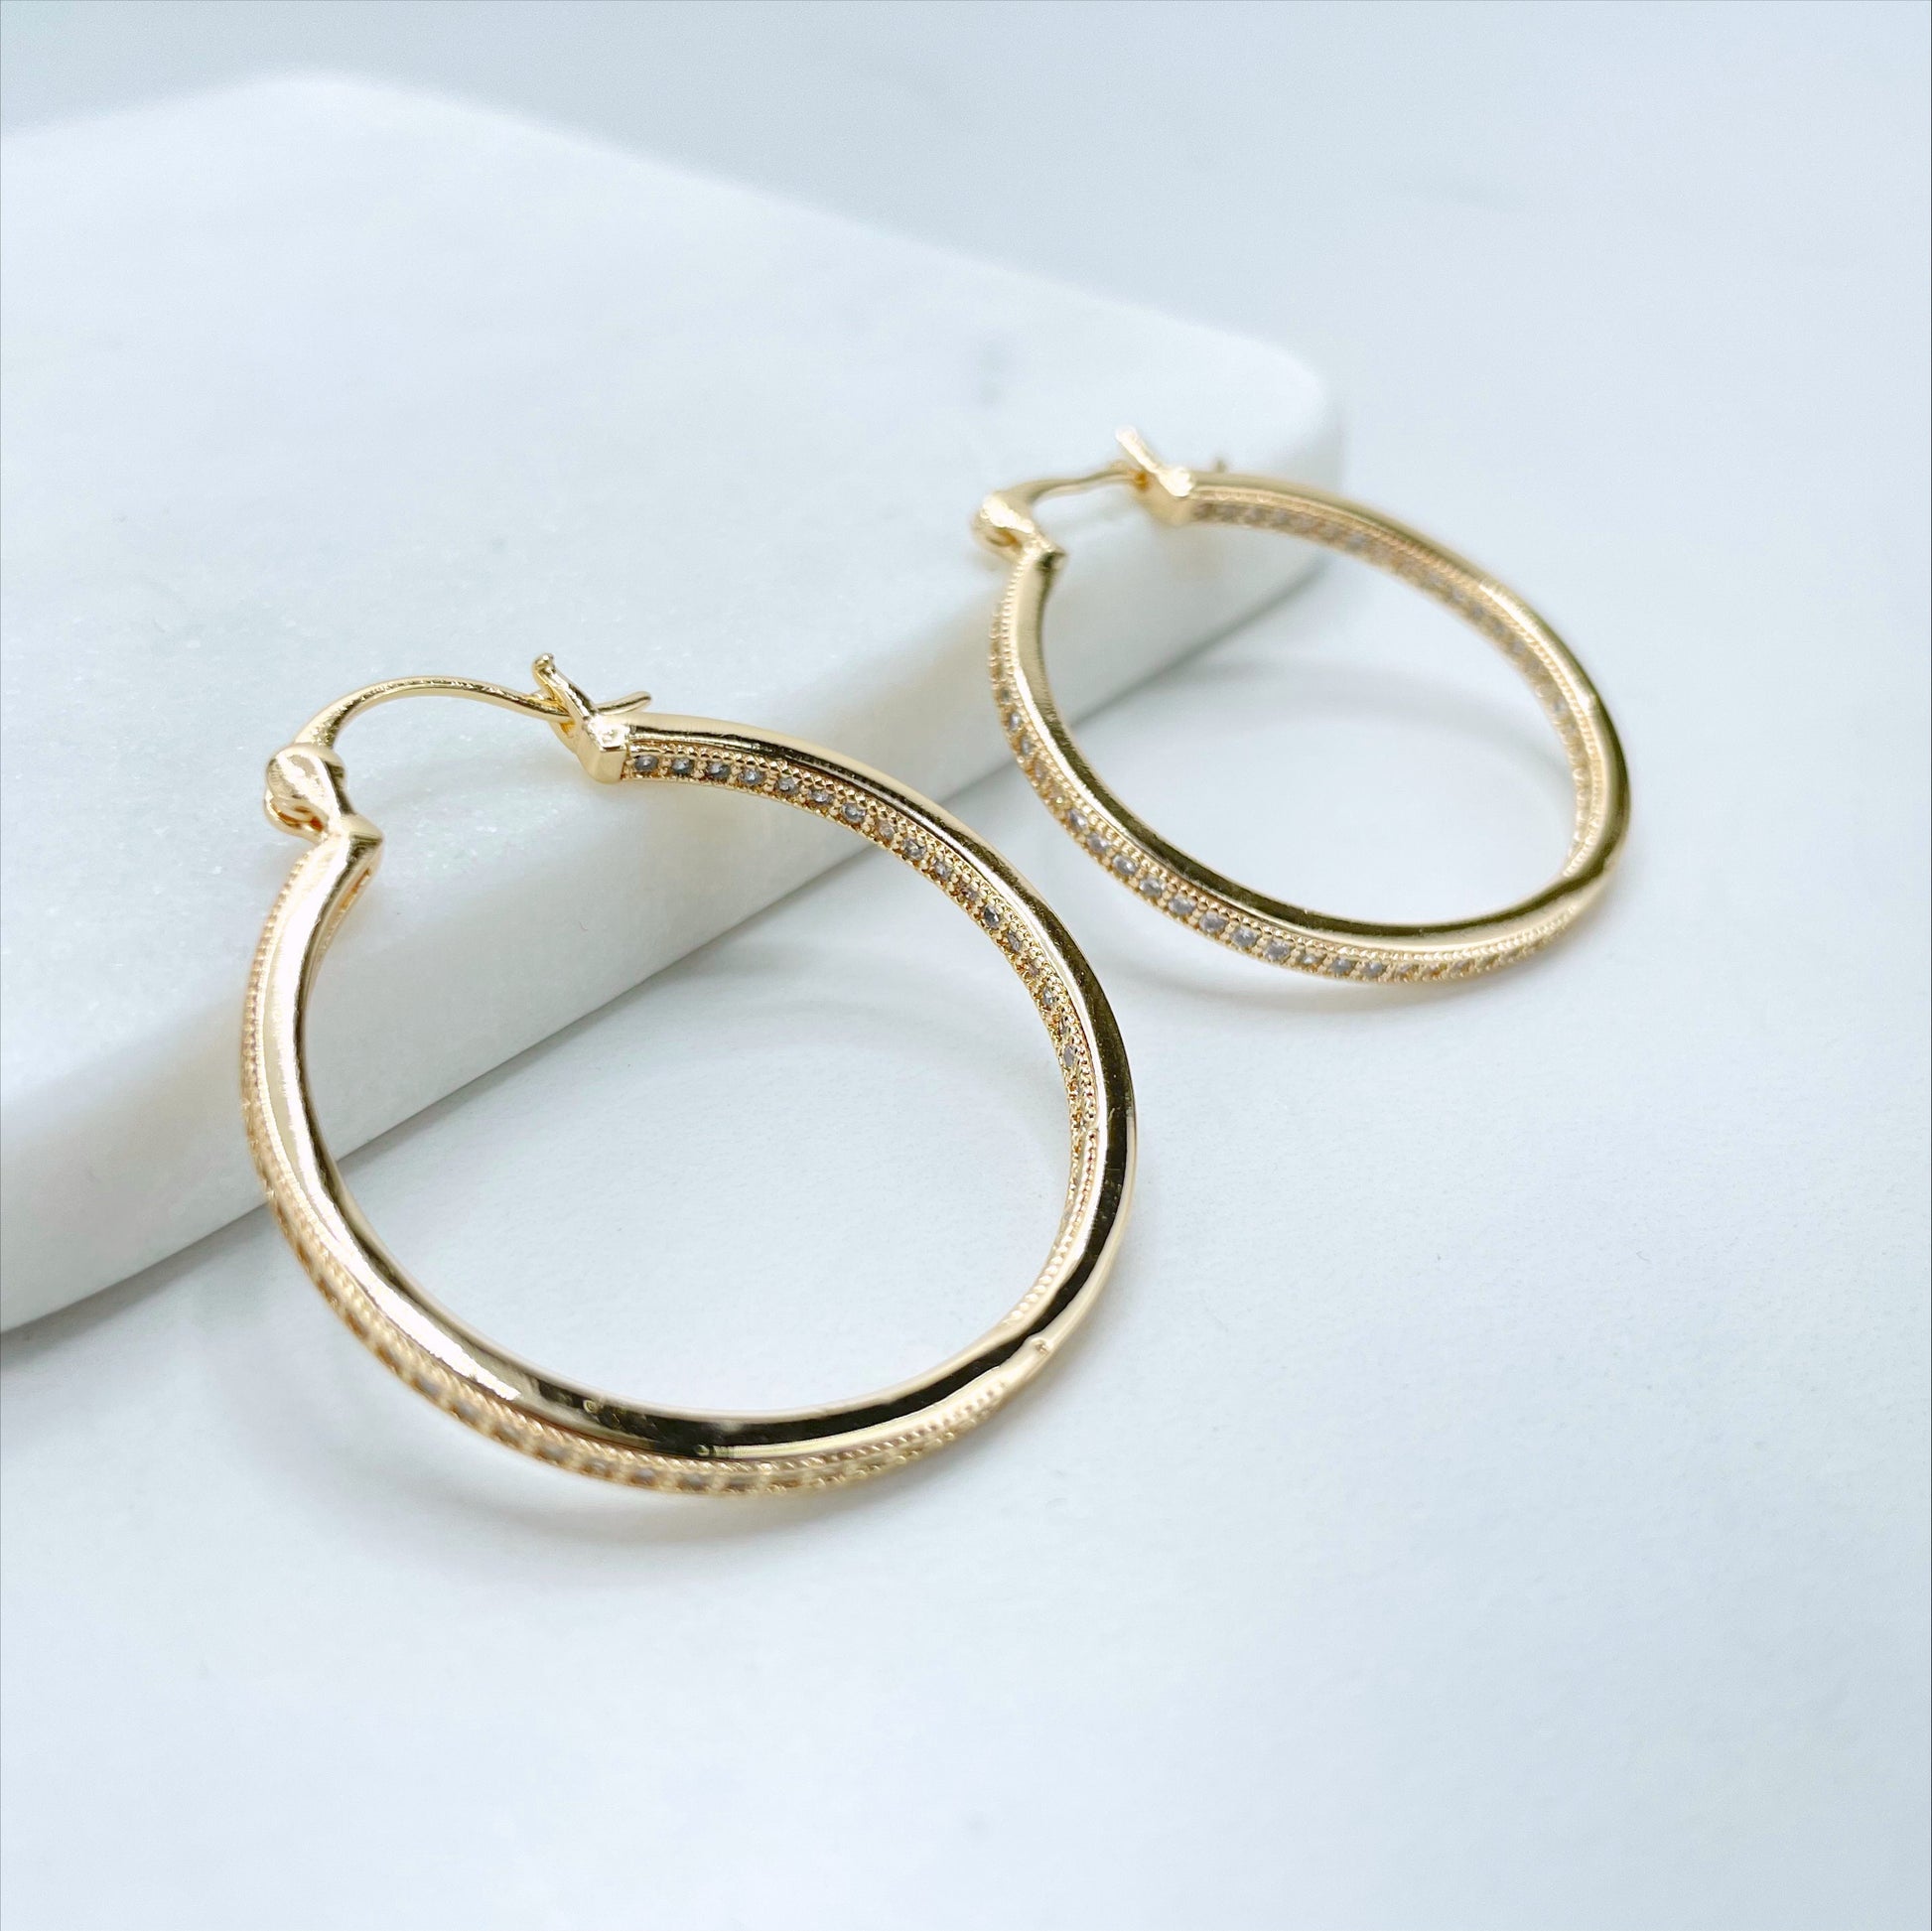 18k Gold Filled 34mm Hoop Earrings with Micro Pave, Cubic Zirconia, Dainty Hoops, Zircon Hoops, Wholesale Jewelry Making Supplies